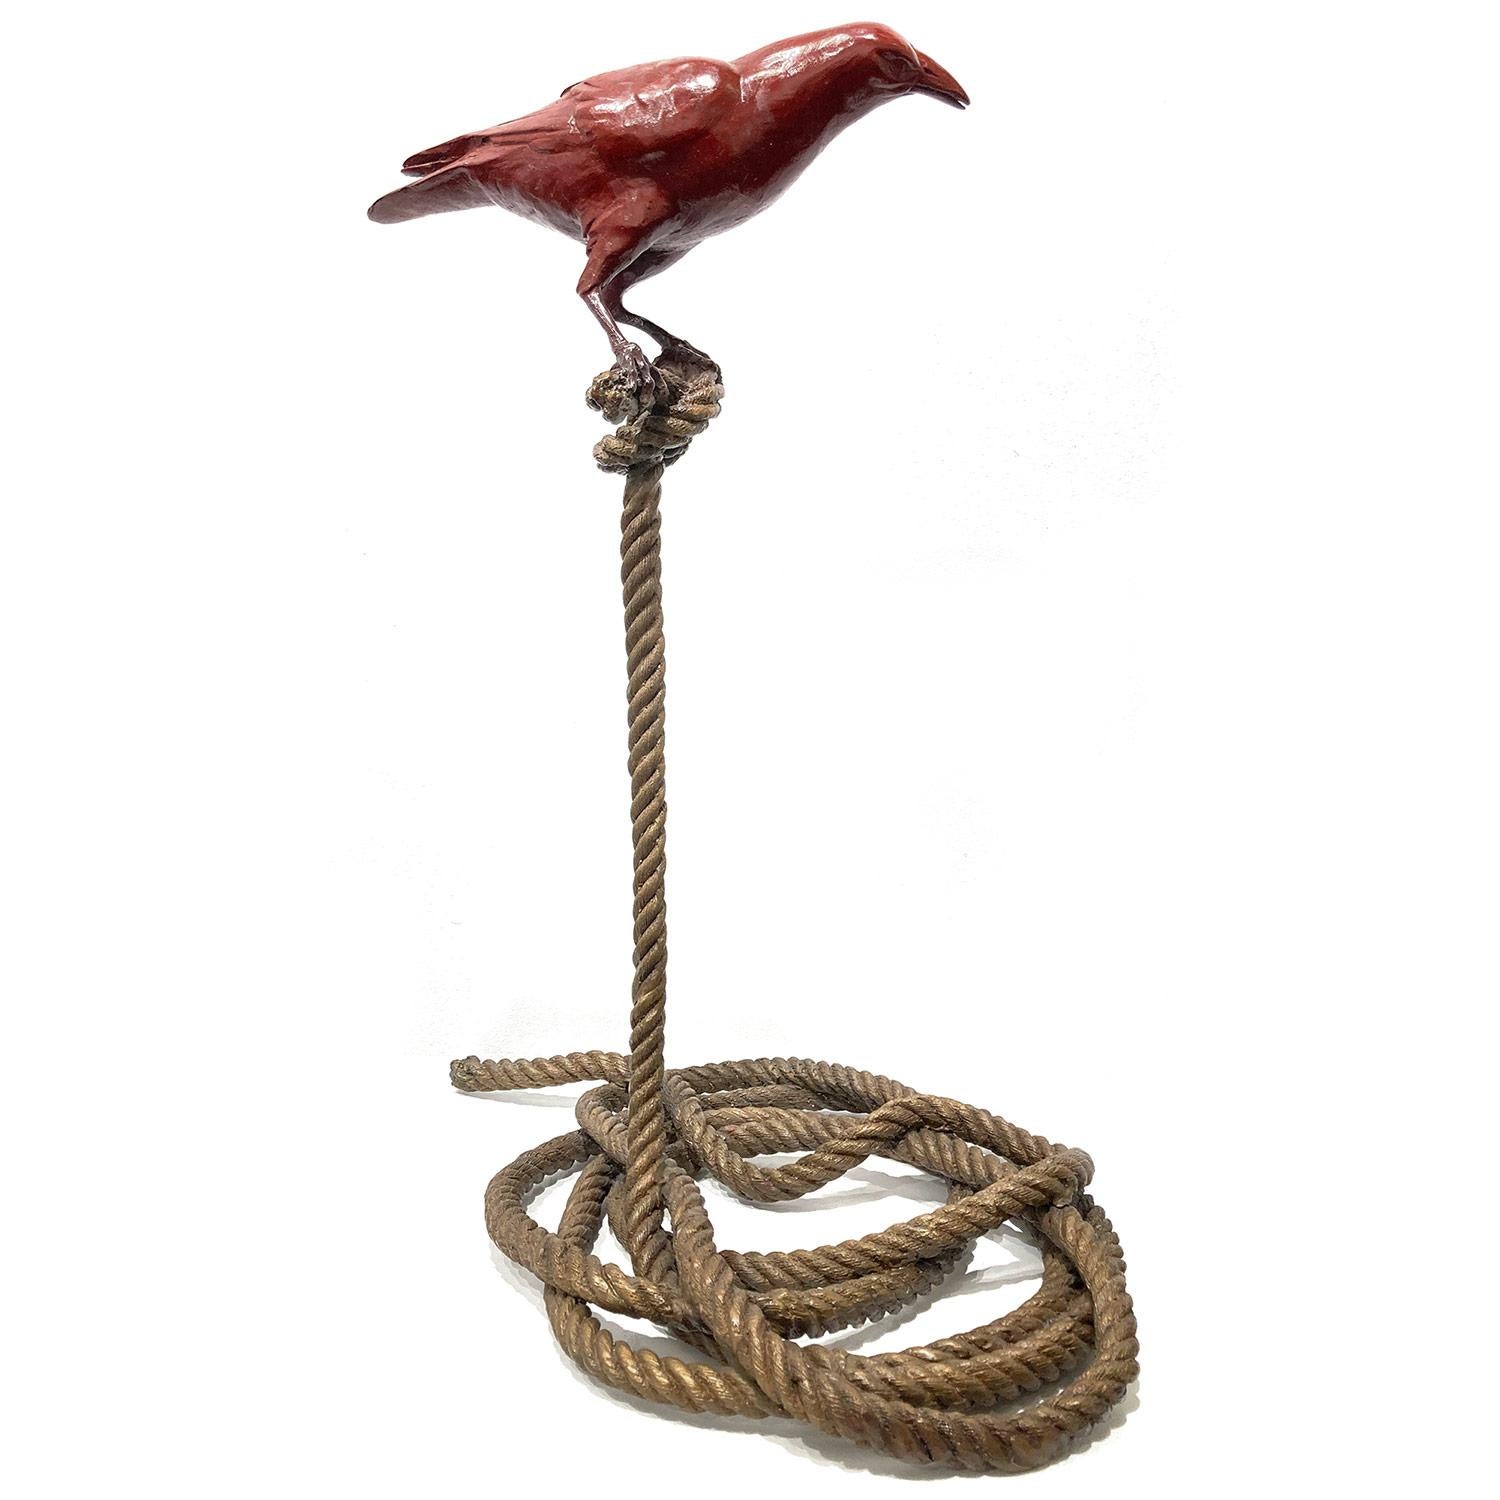 A wonderful yet very playful piece depicting Harold, a magpie standing on a short rope from Gillie and Marc's collection which explores all the interesting, complex characteristics of the magpie. Here we find this very dynamic piece as the bird is